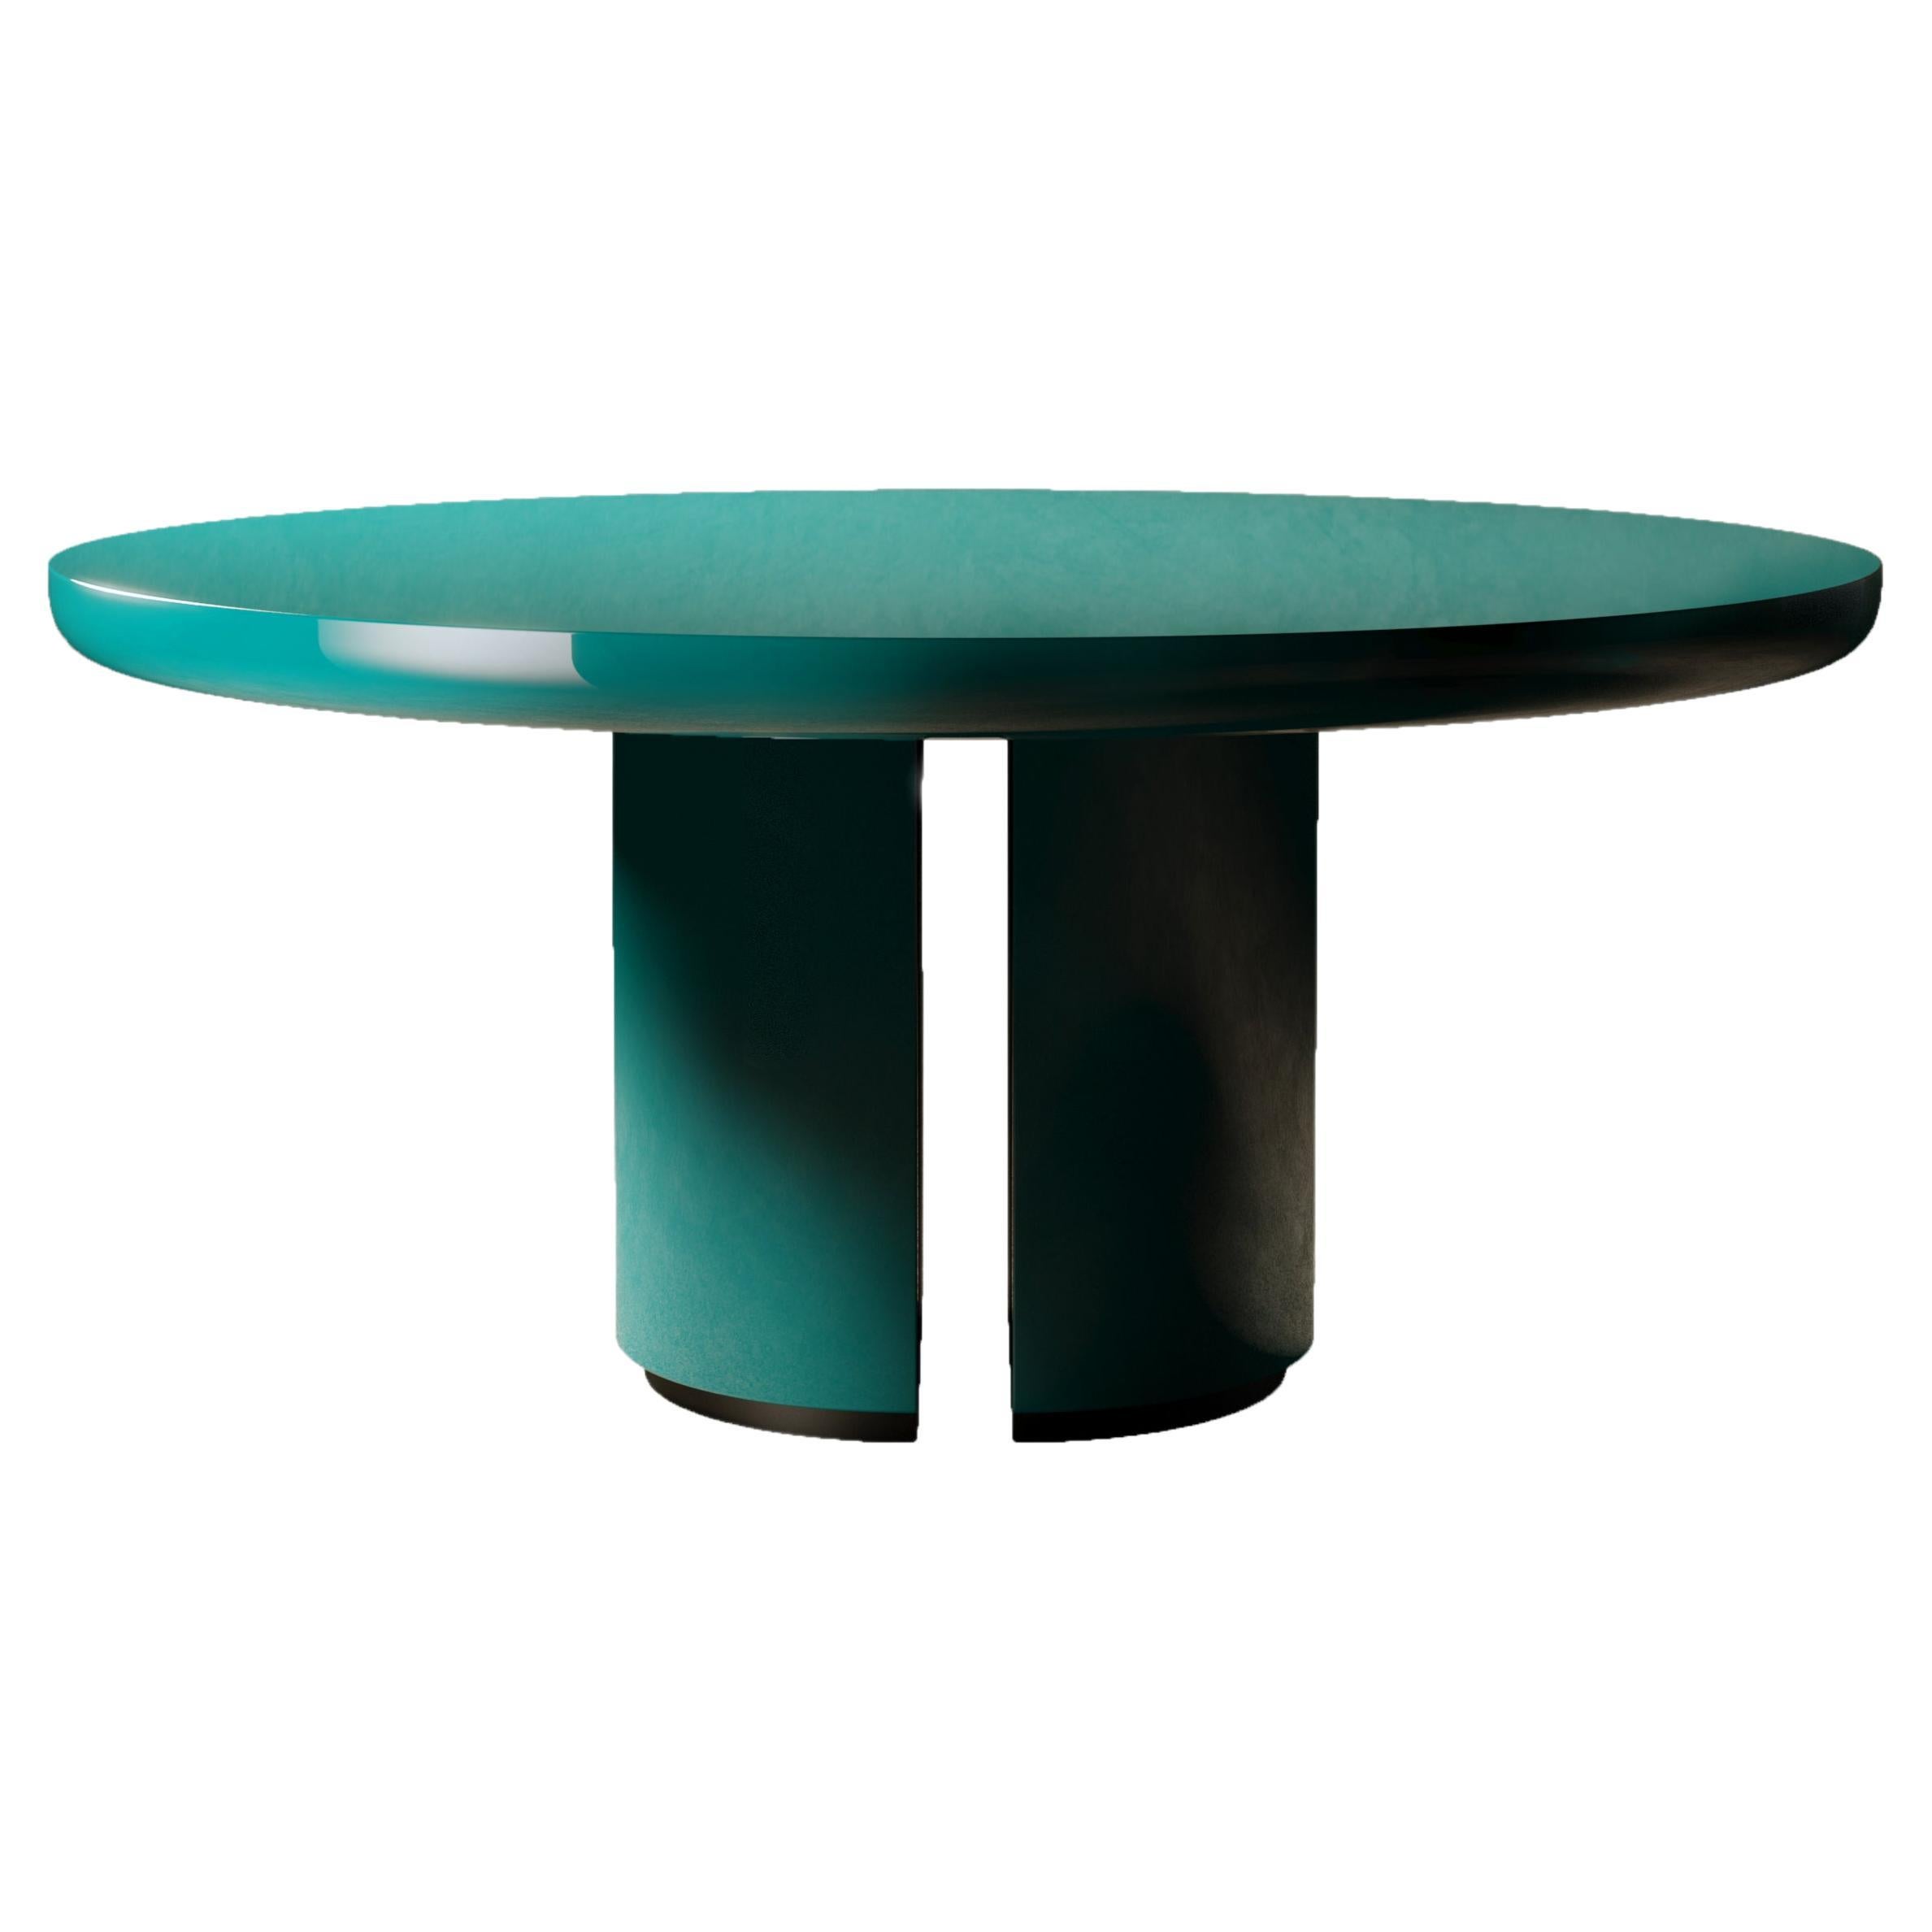 A Day in the Life Round - Glossy Wood Dining Table For Sale